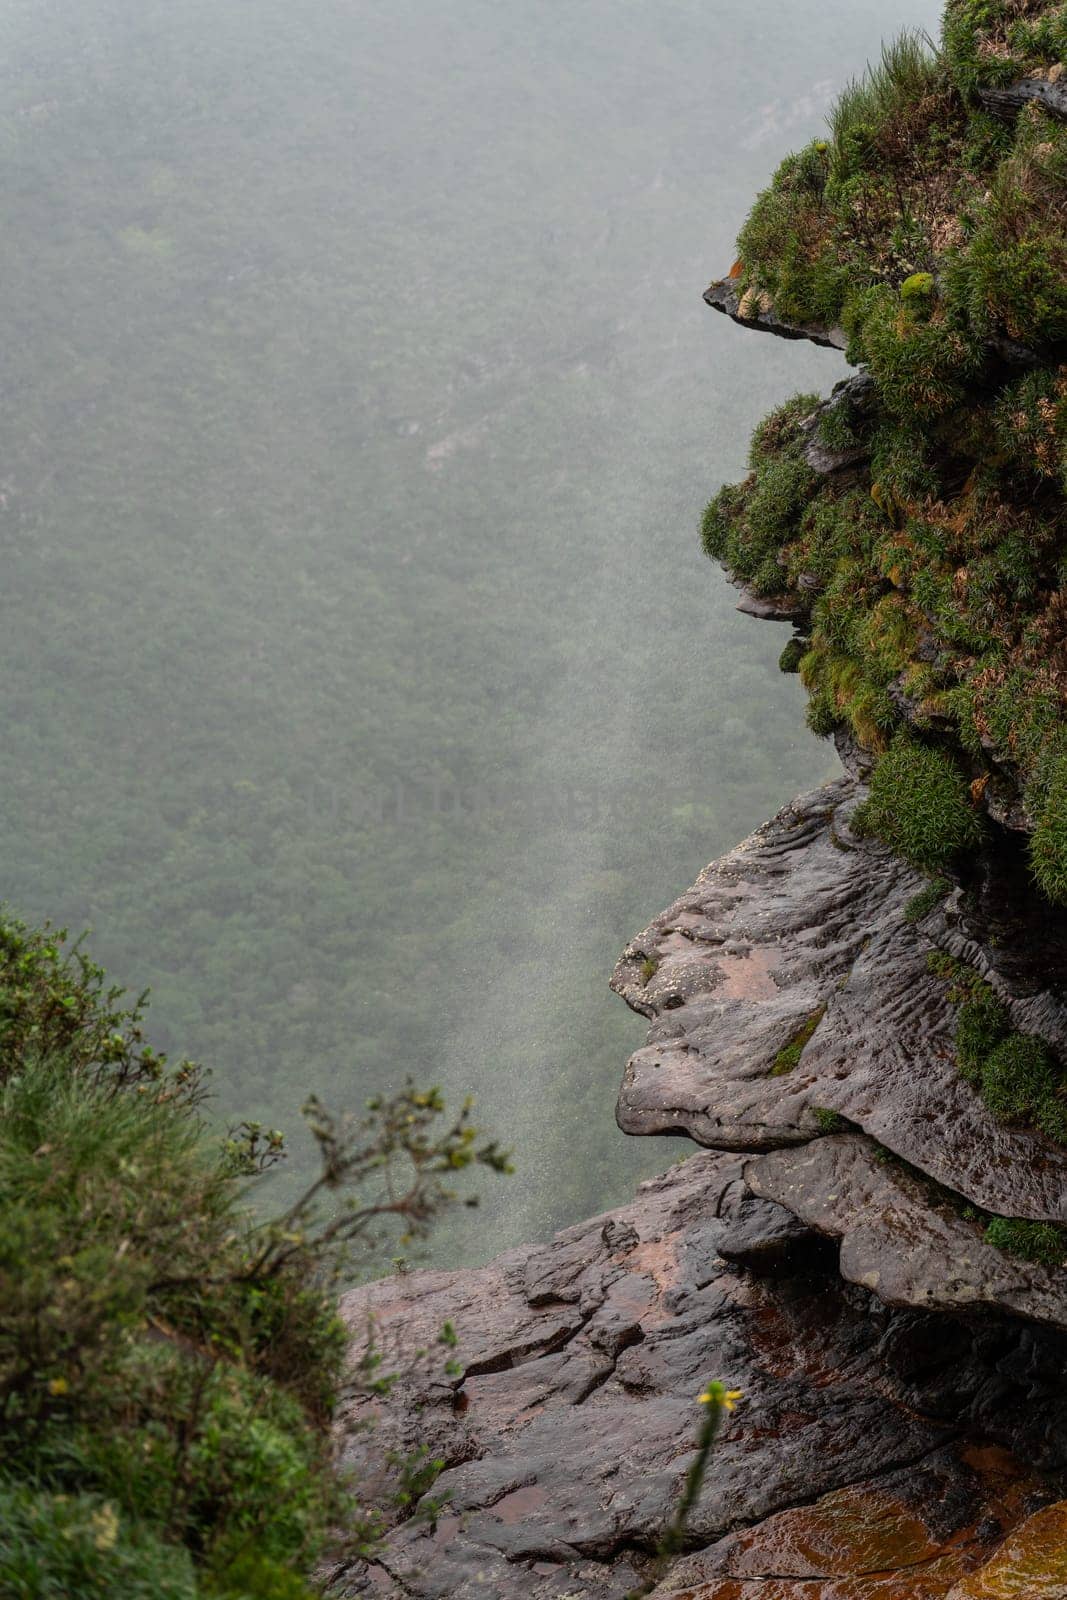 A waterfall's top part is blown by winds, forming a misty curtain above a verdant valley.